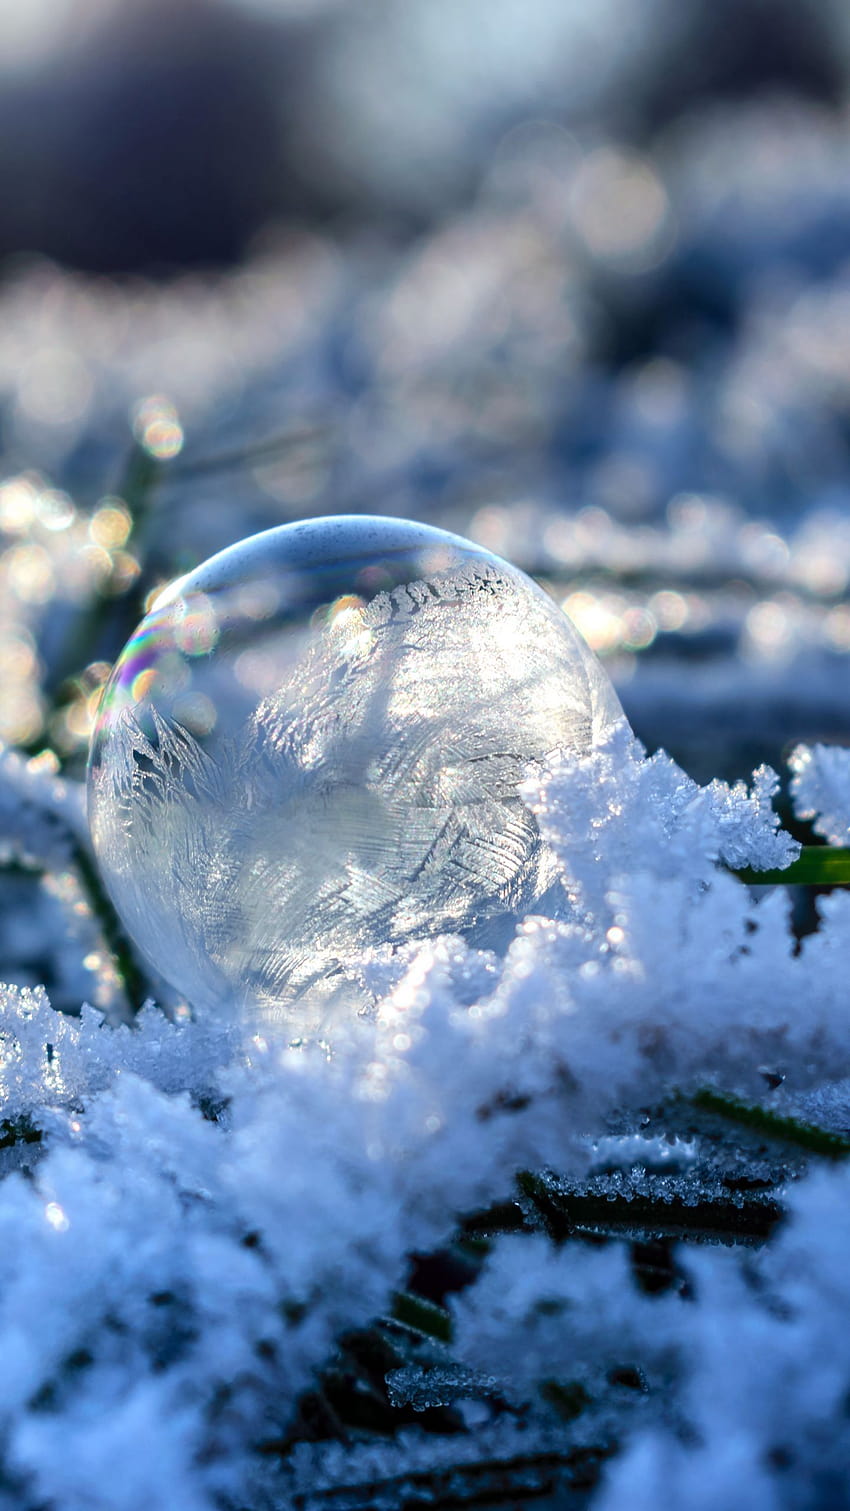 1440x2560 bubble, orb, frost, snow q samsung galaxy s6, s7, edge, note, lg g4 backgrounds, bubbles winter HD phone wallpaper